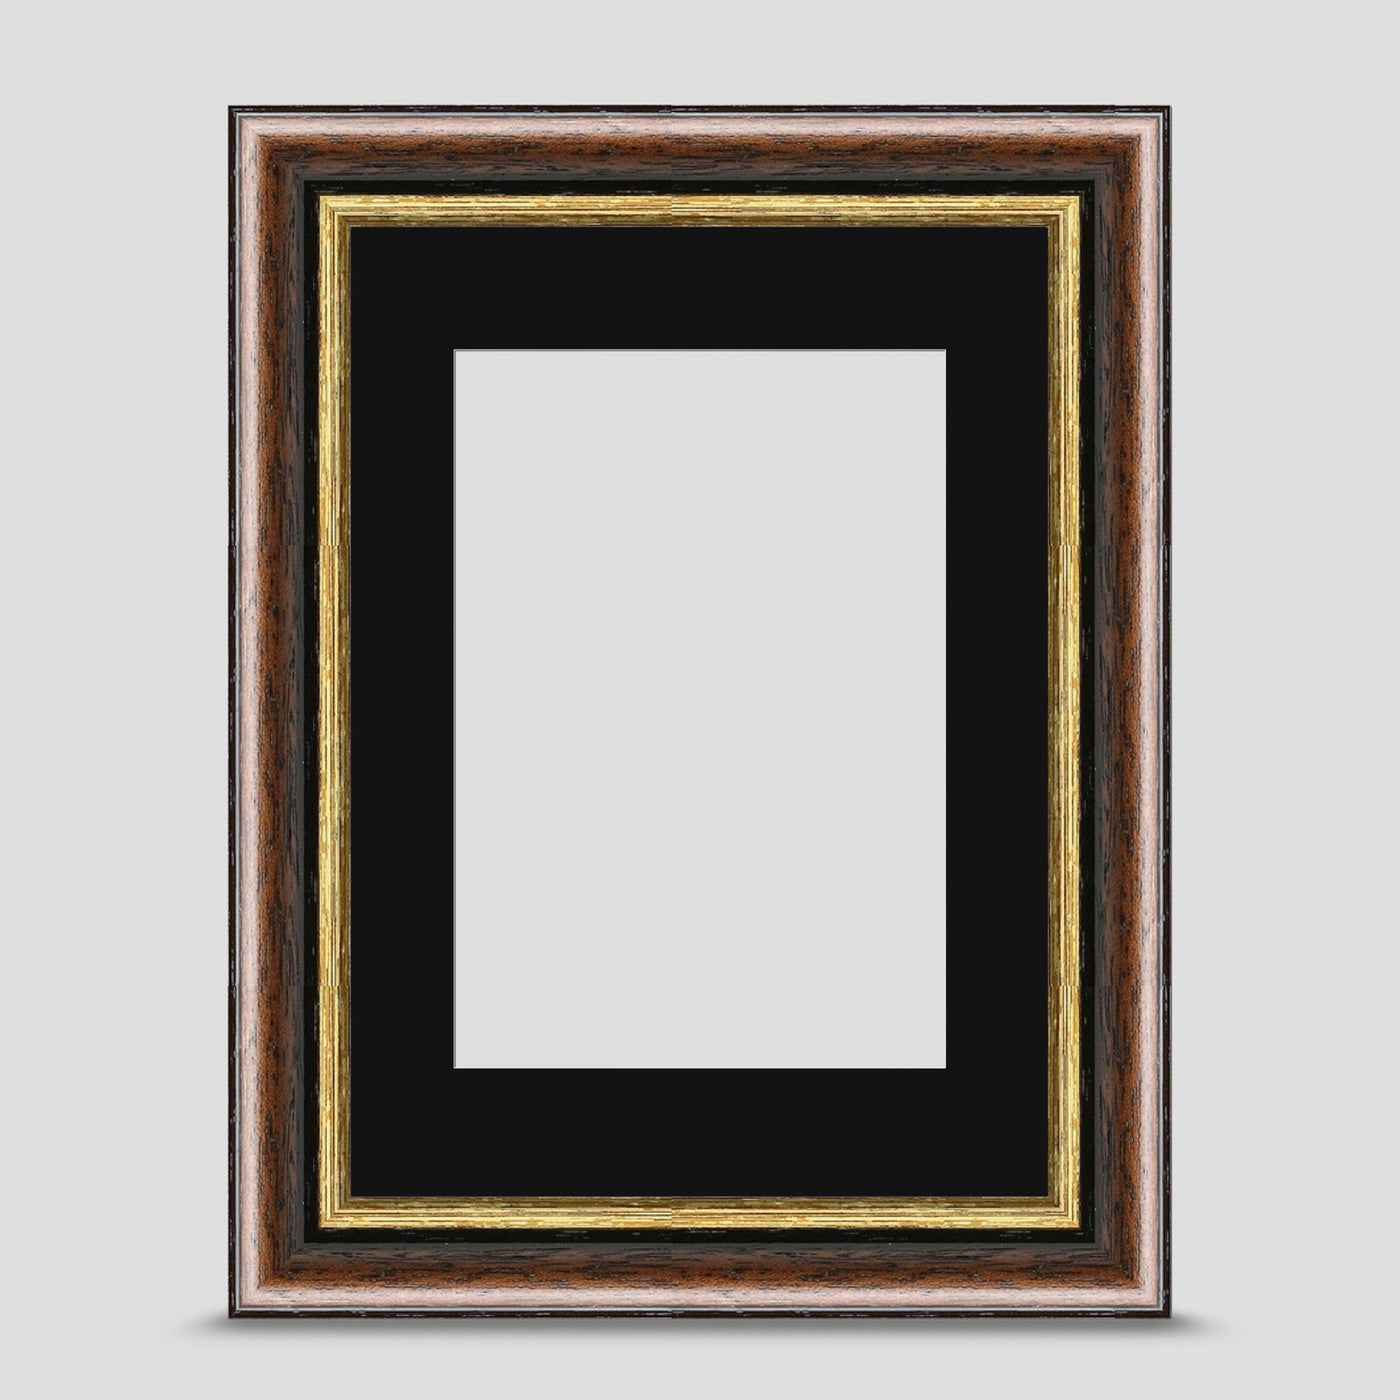 7x5 Brown & Gold Picture Frame with a 5x3.5 Mount